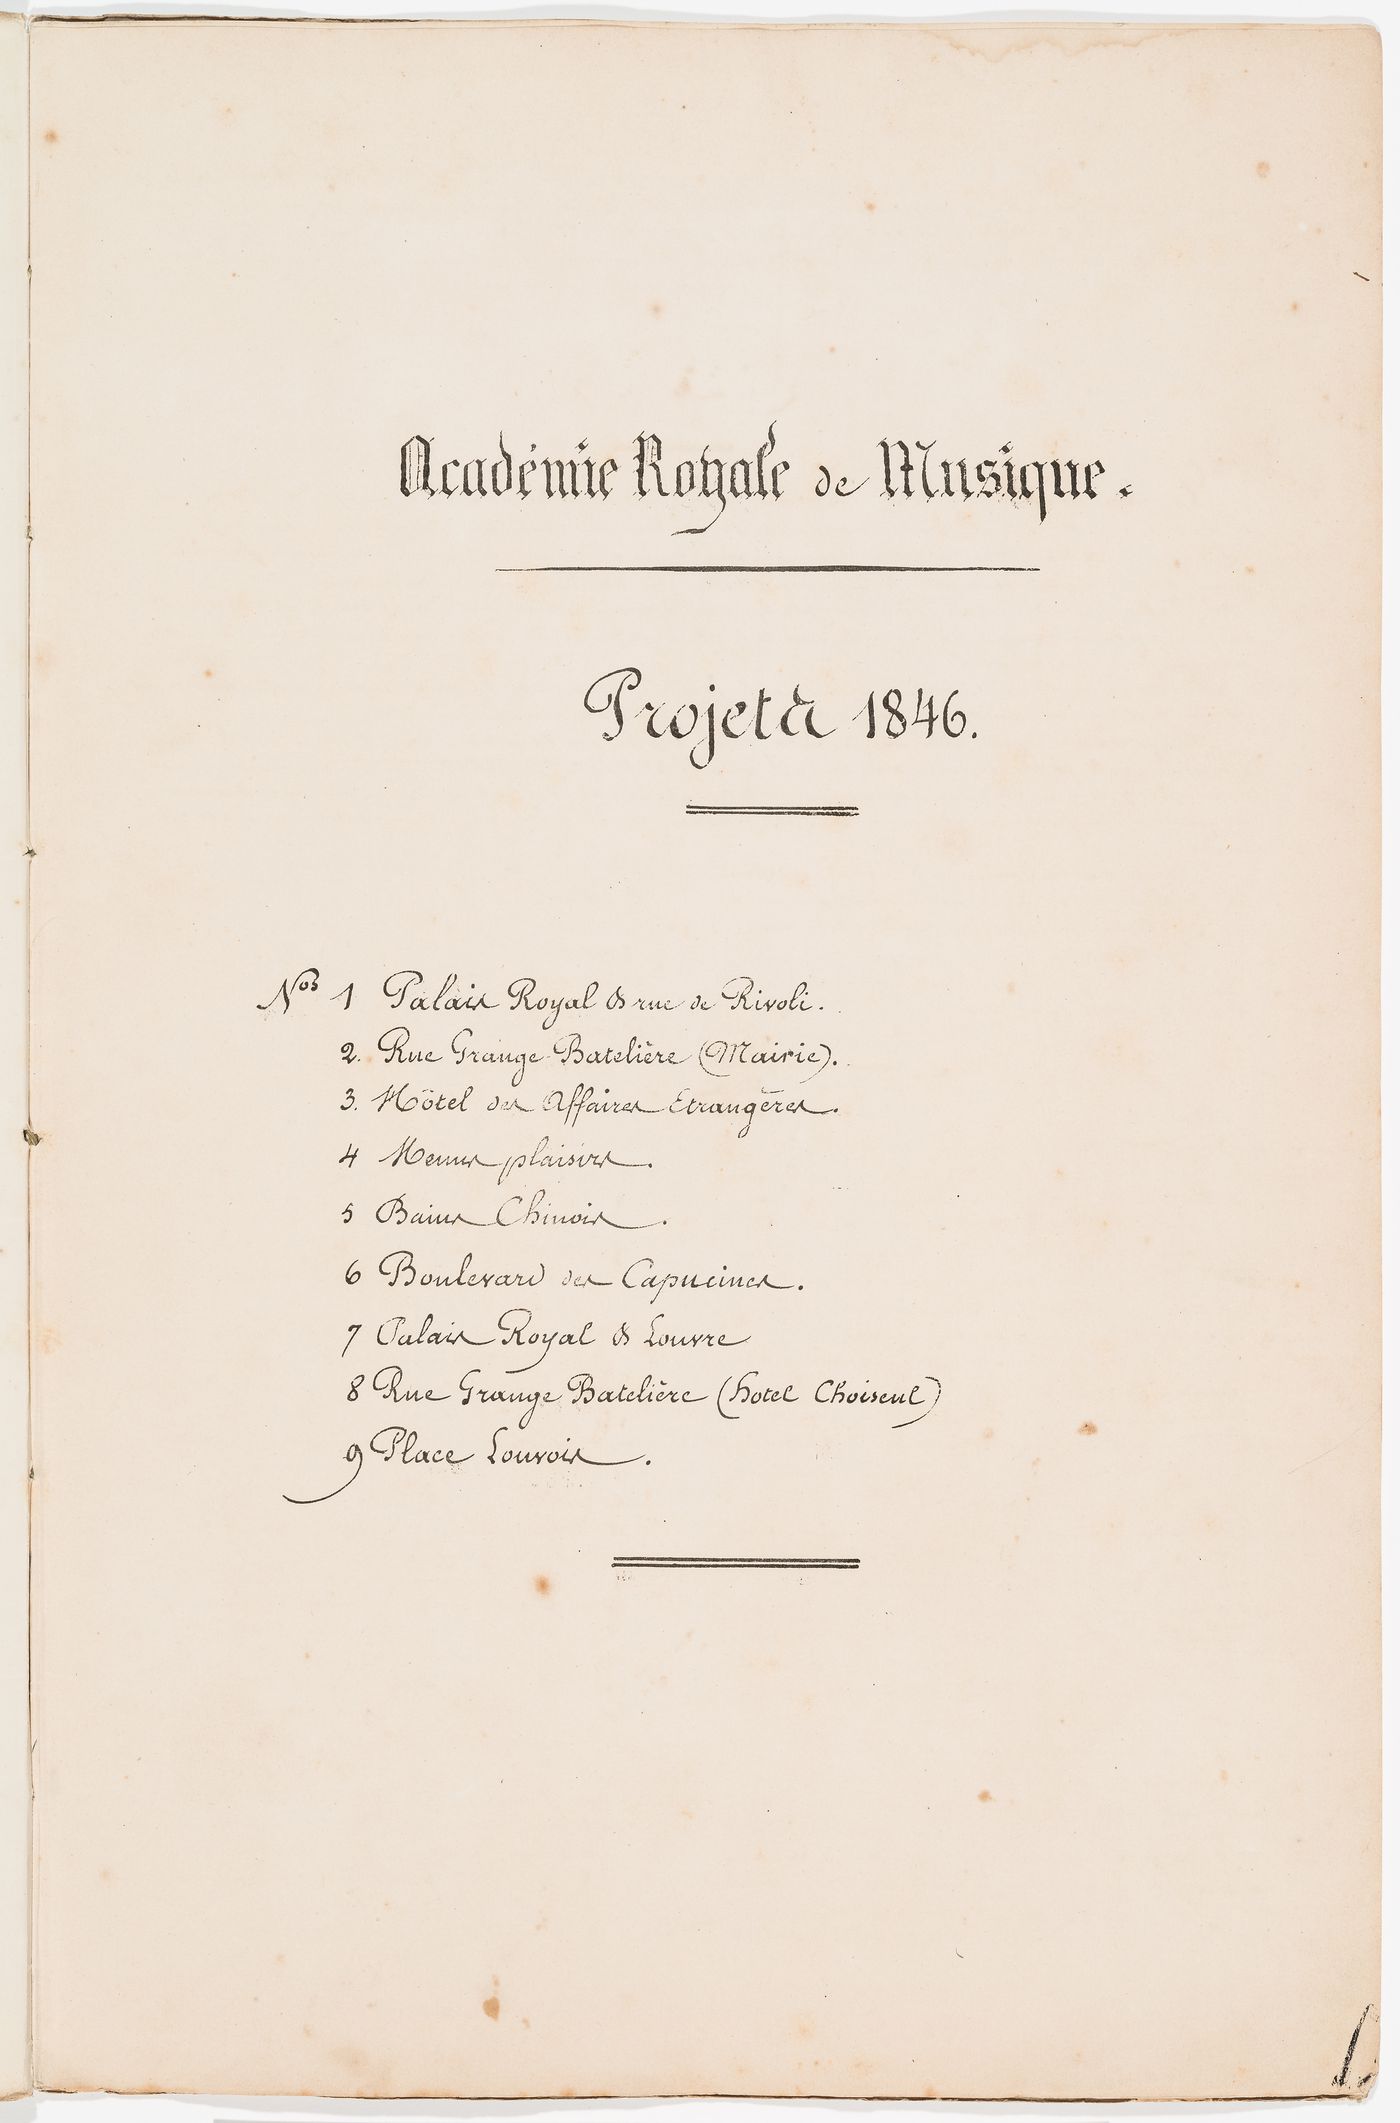 Table of contents listing nine possible locations for an opera house for the Académie royale de musique; verso: Project no. 1: Site analysis and cost estimate for an opera house for the Académie royale de musique, place du Palais Royal and rue de Rivoli